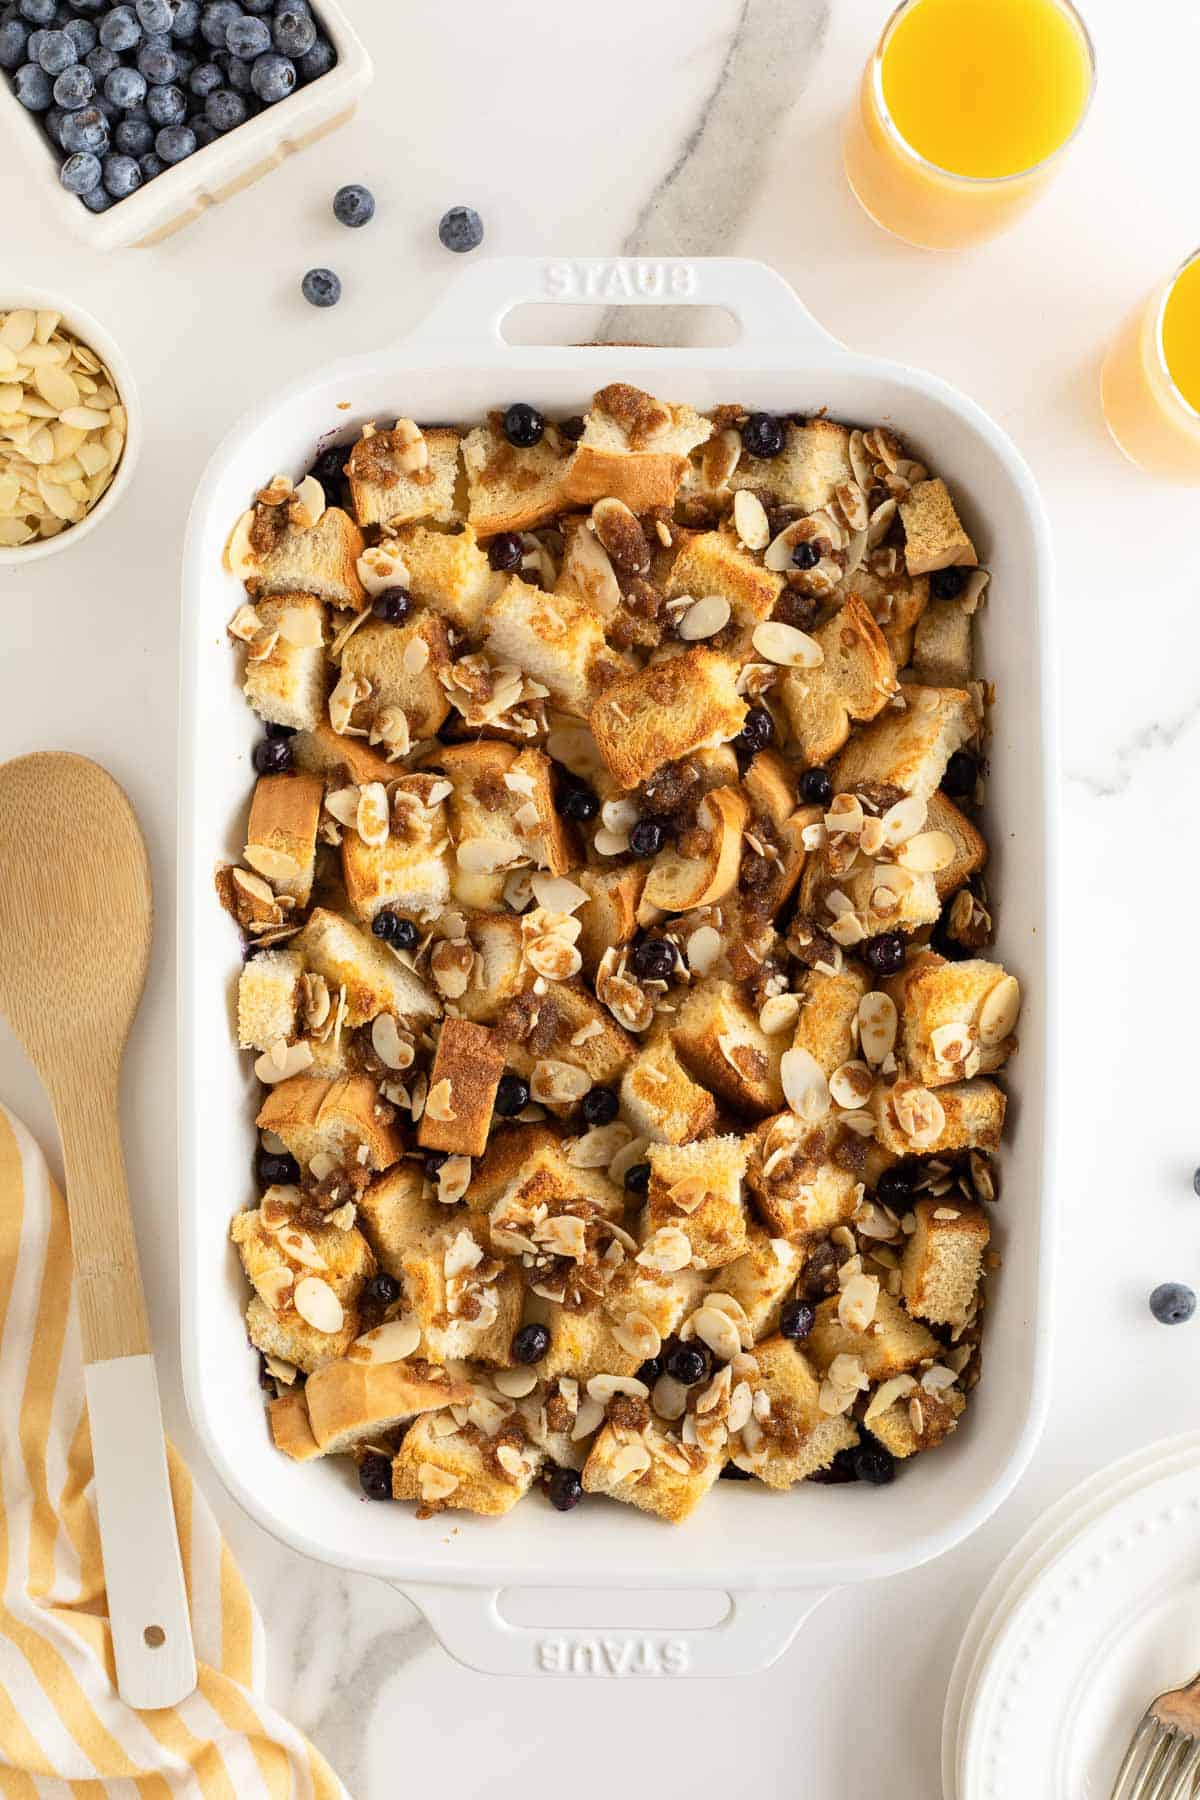 Blueberry French toast casserole in a white baking dish surrounded by glasses of orange juice and a carton of blueberries.